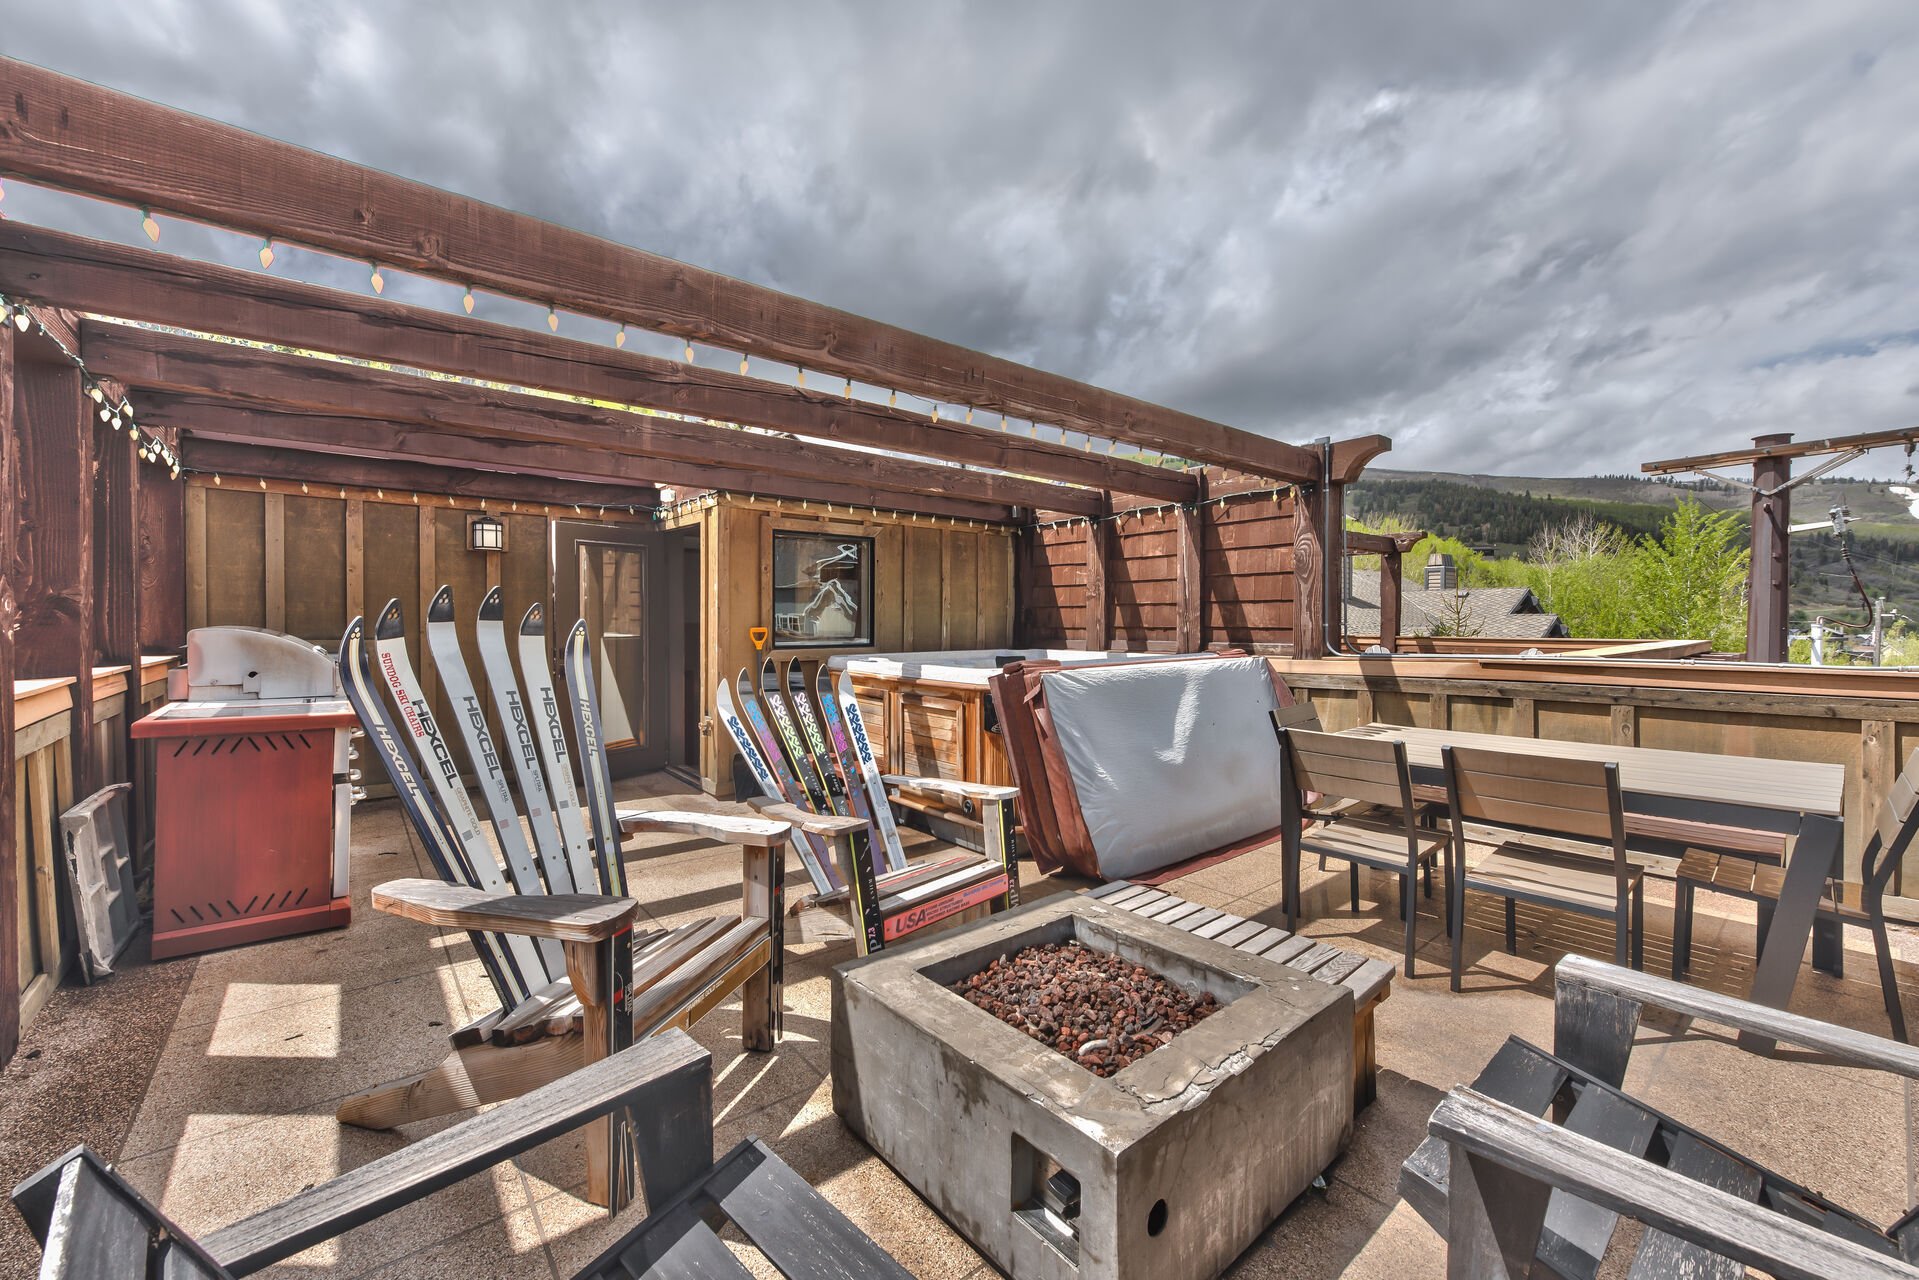 Rooftop Deck with a 7-Seat Hot Tub, Built-in BBQ Grill, Fire Pit and Patio Seating